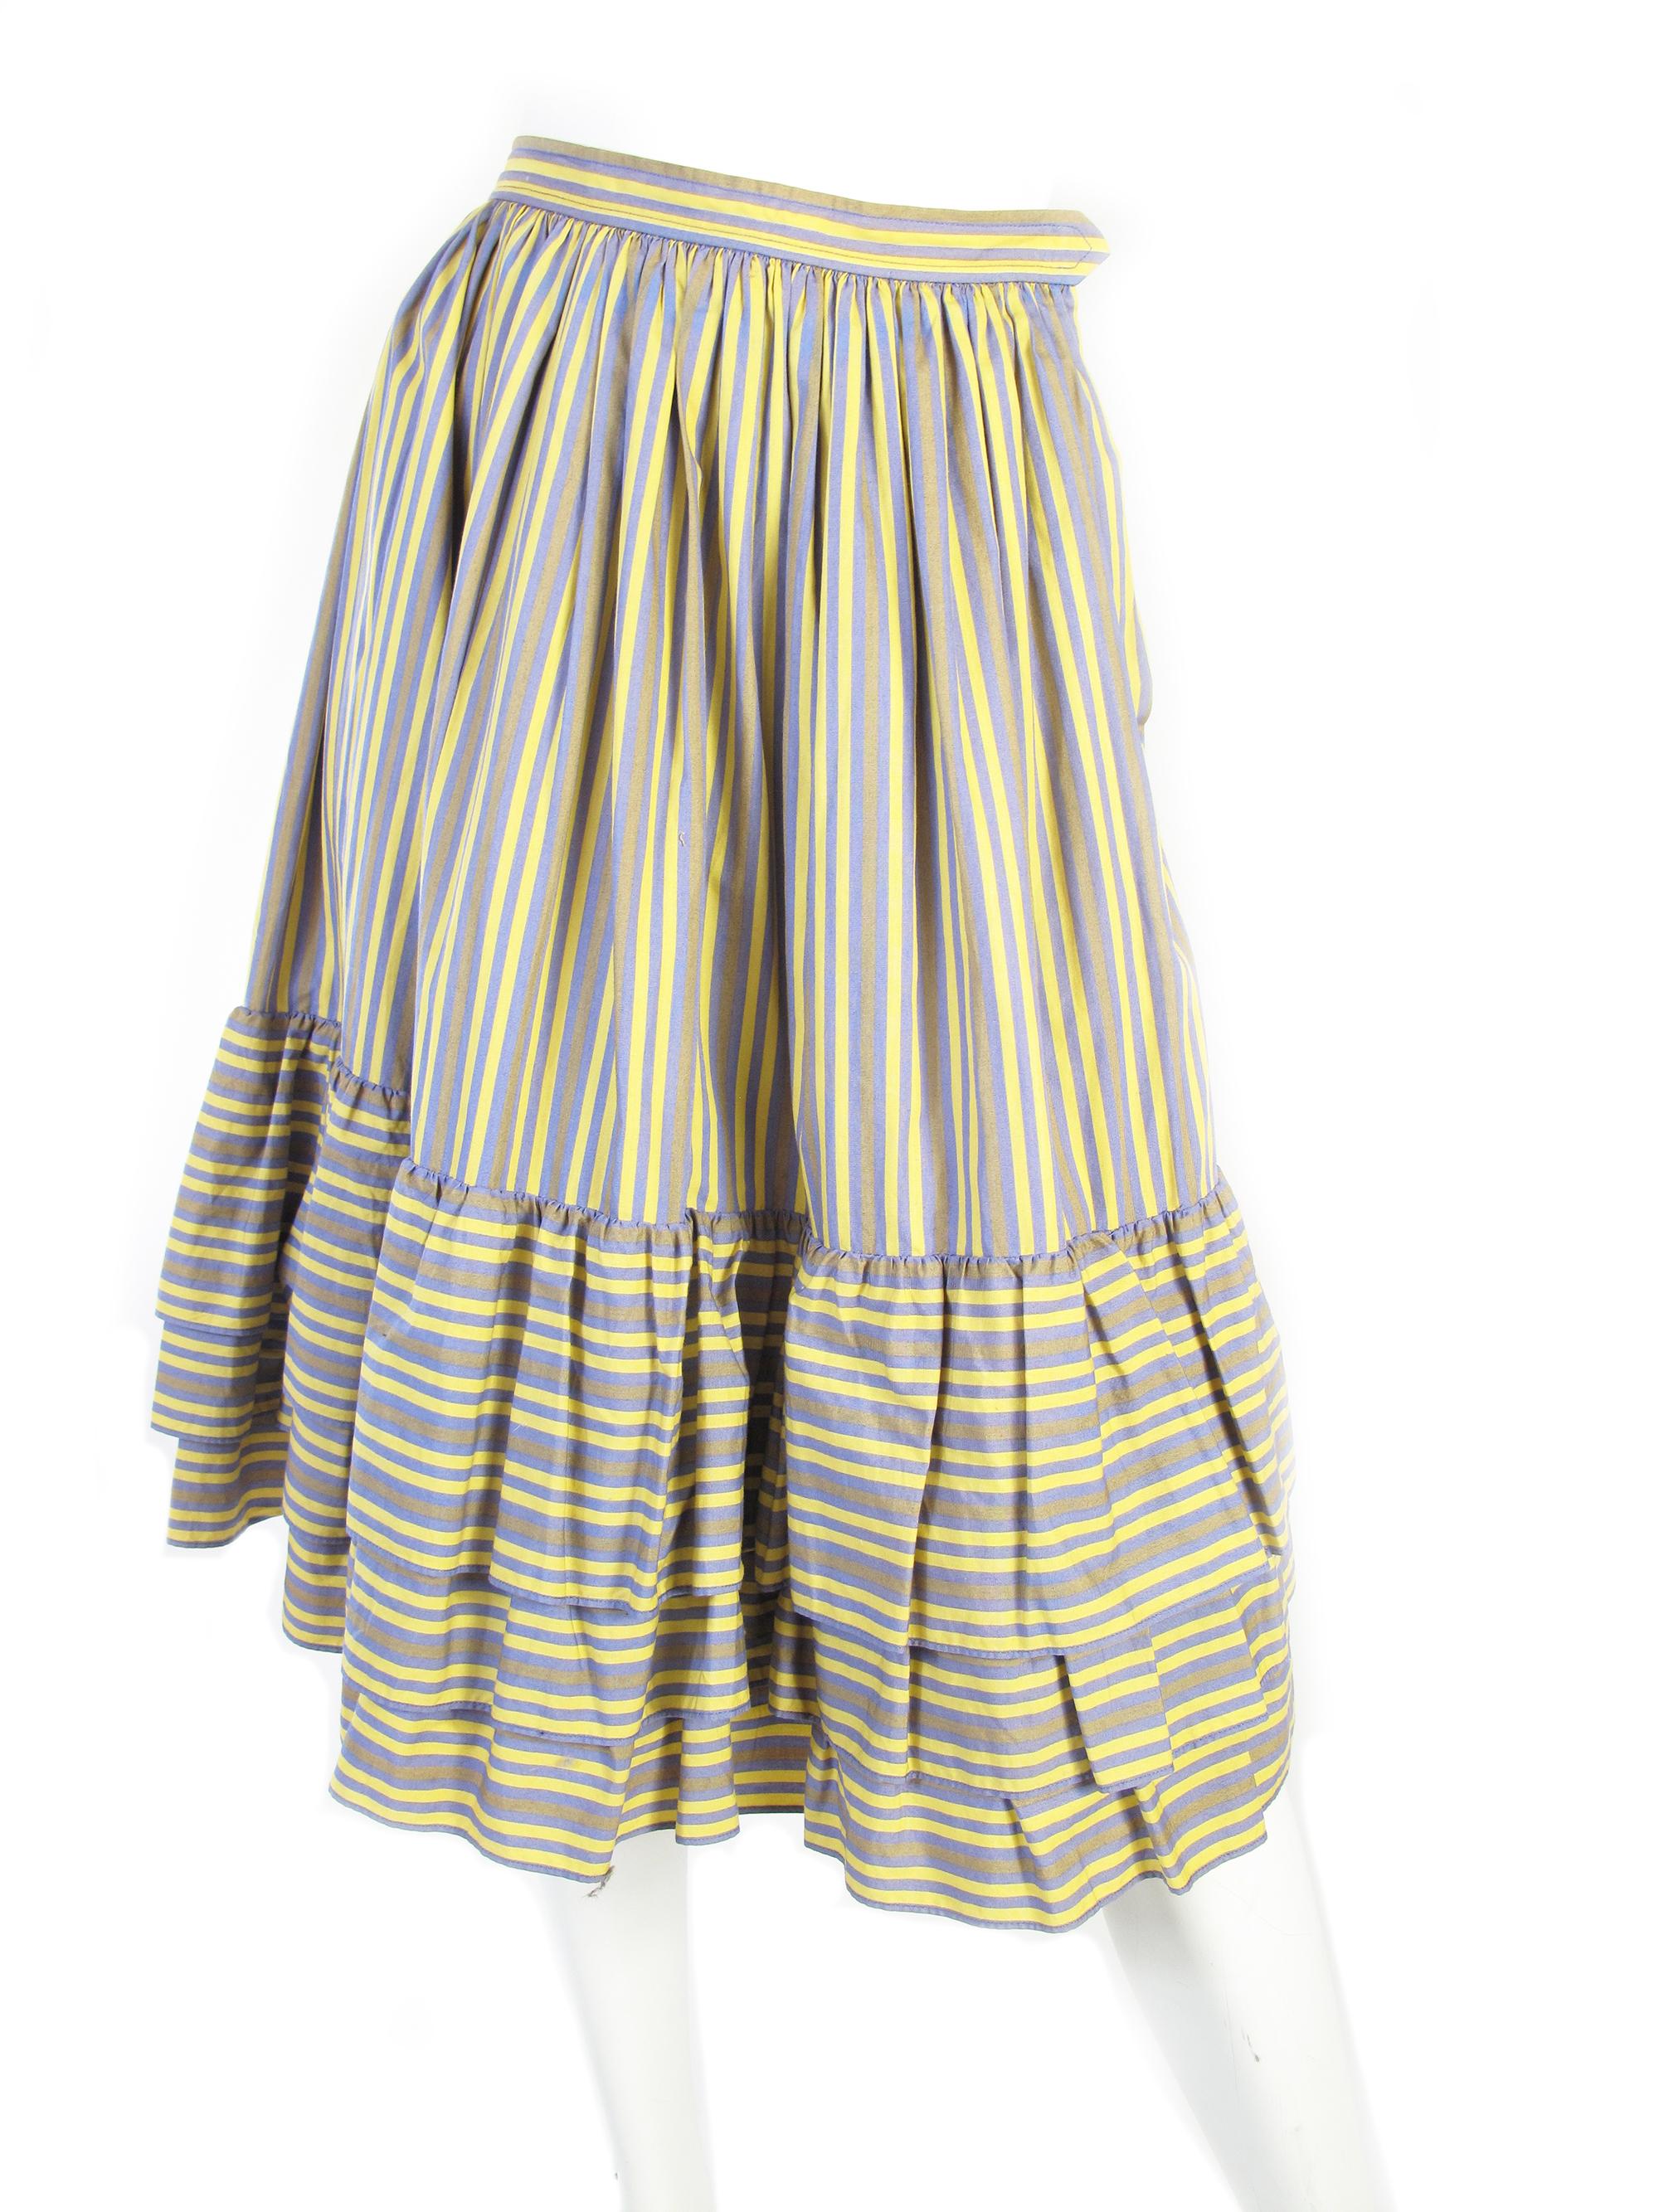 1980s Yves Saint Laurent Rive Gauche cotton striped skirt with ruffle trim.  Size small
